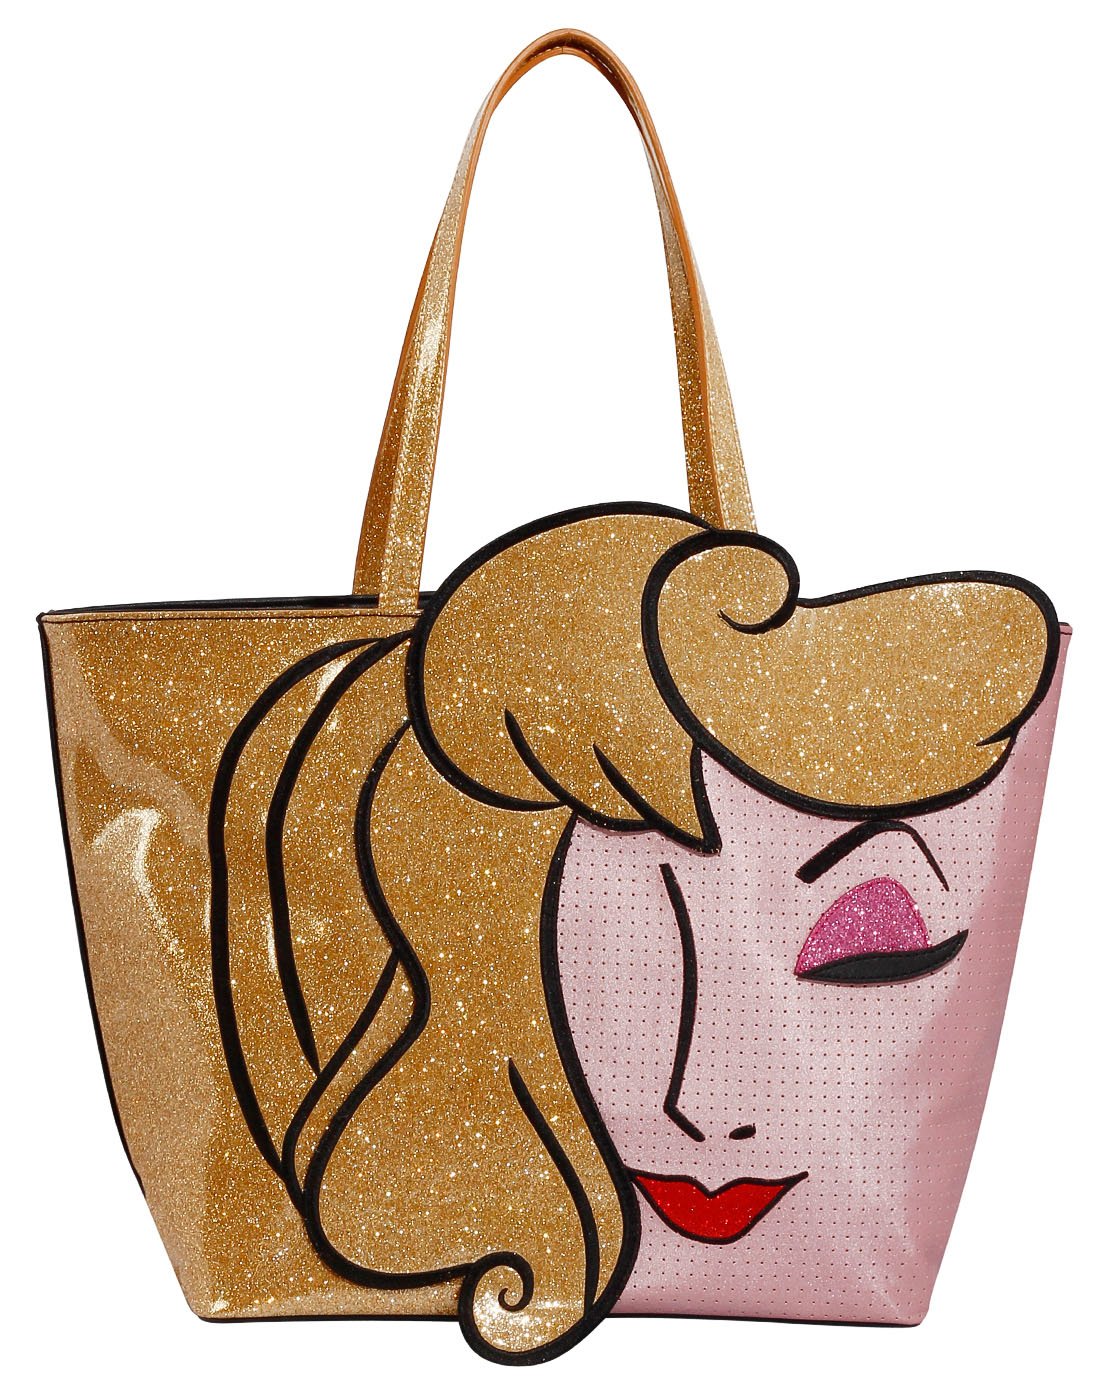 Magical New Danielle Nicole Bags Now on shopDisney - Style -